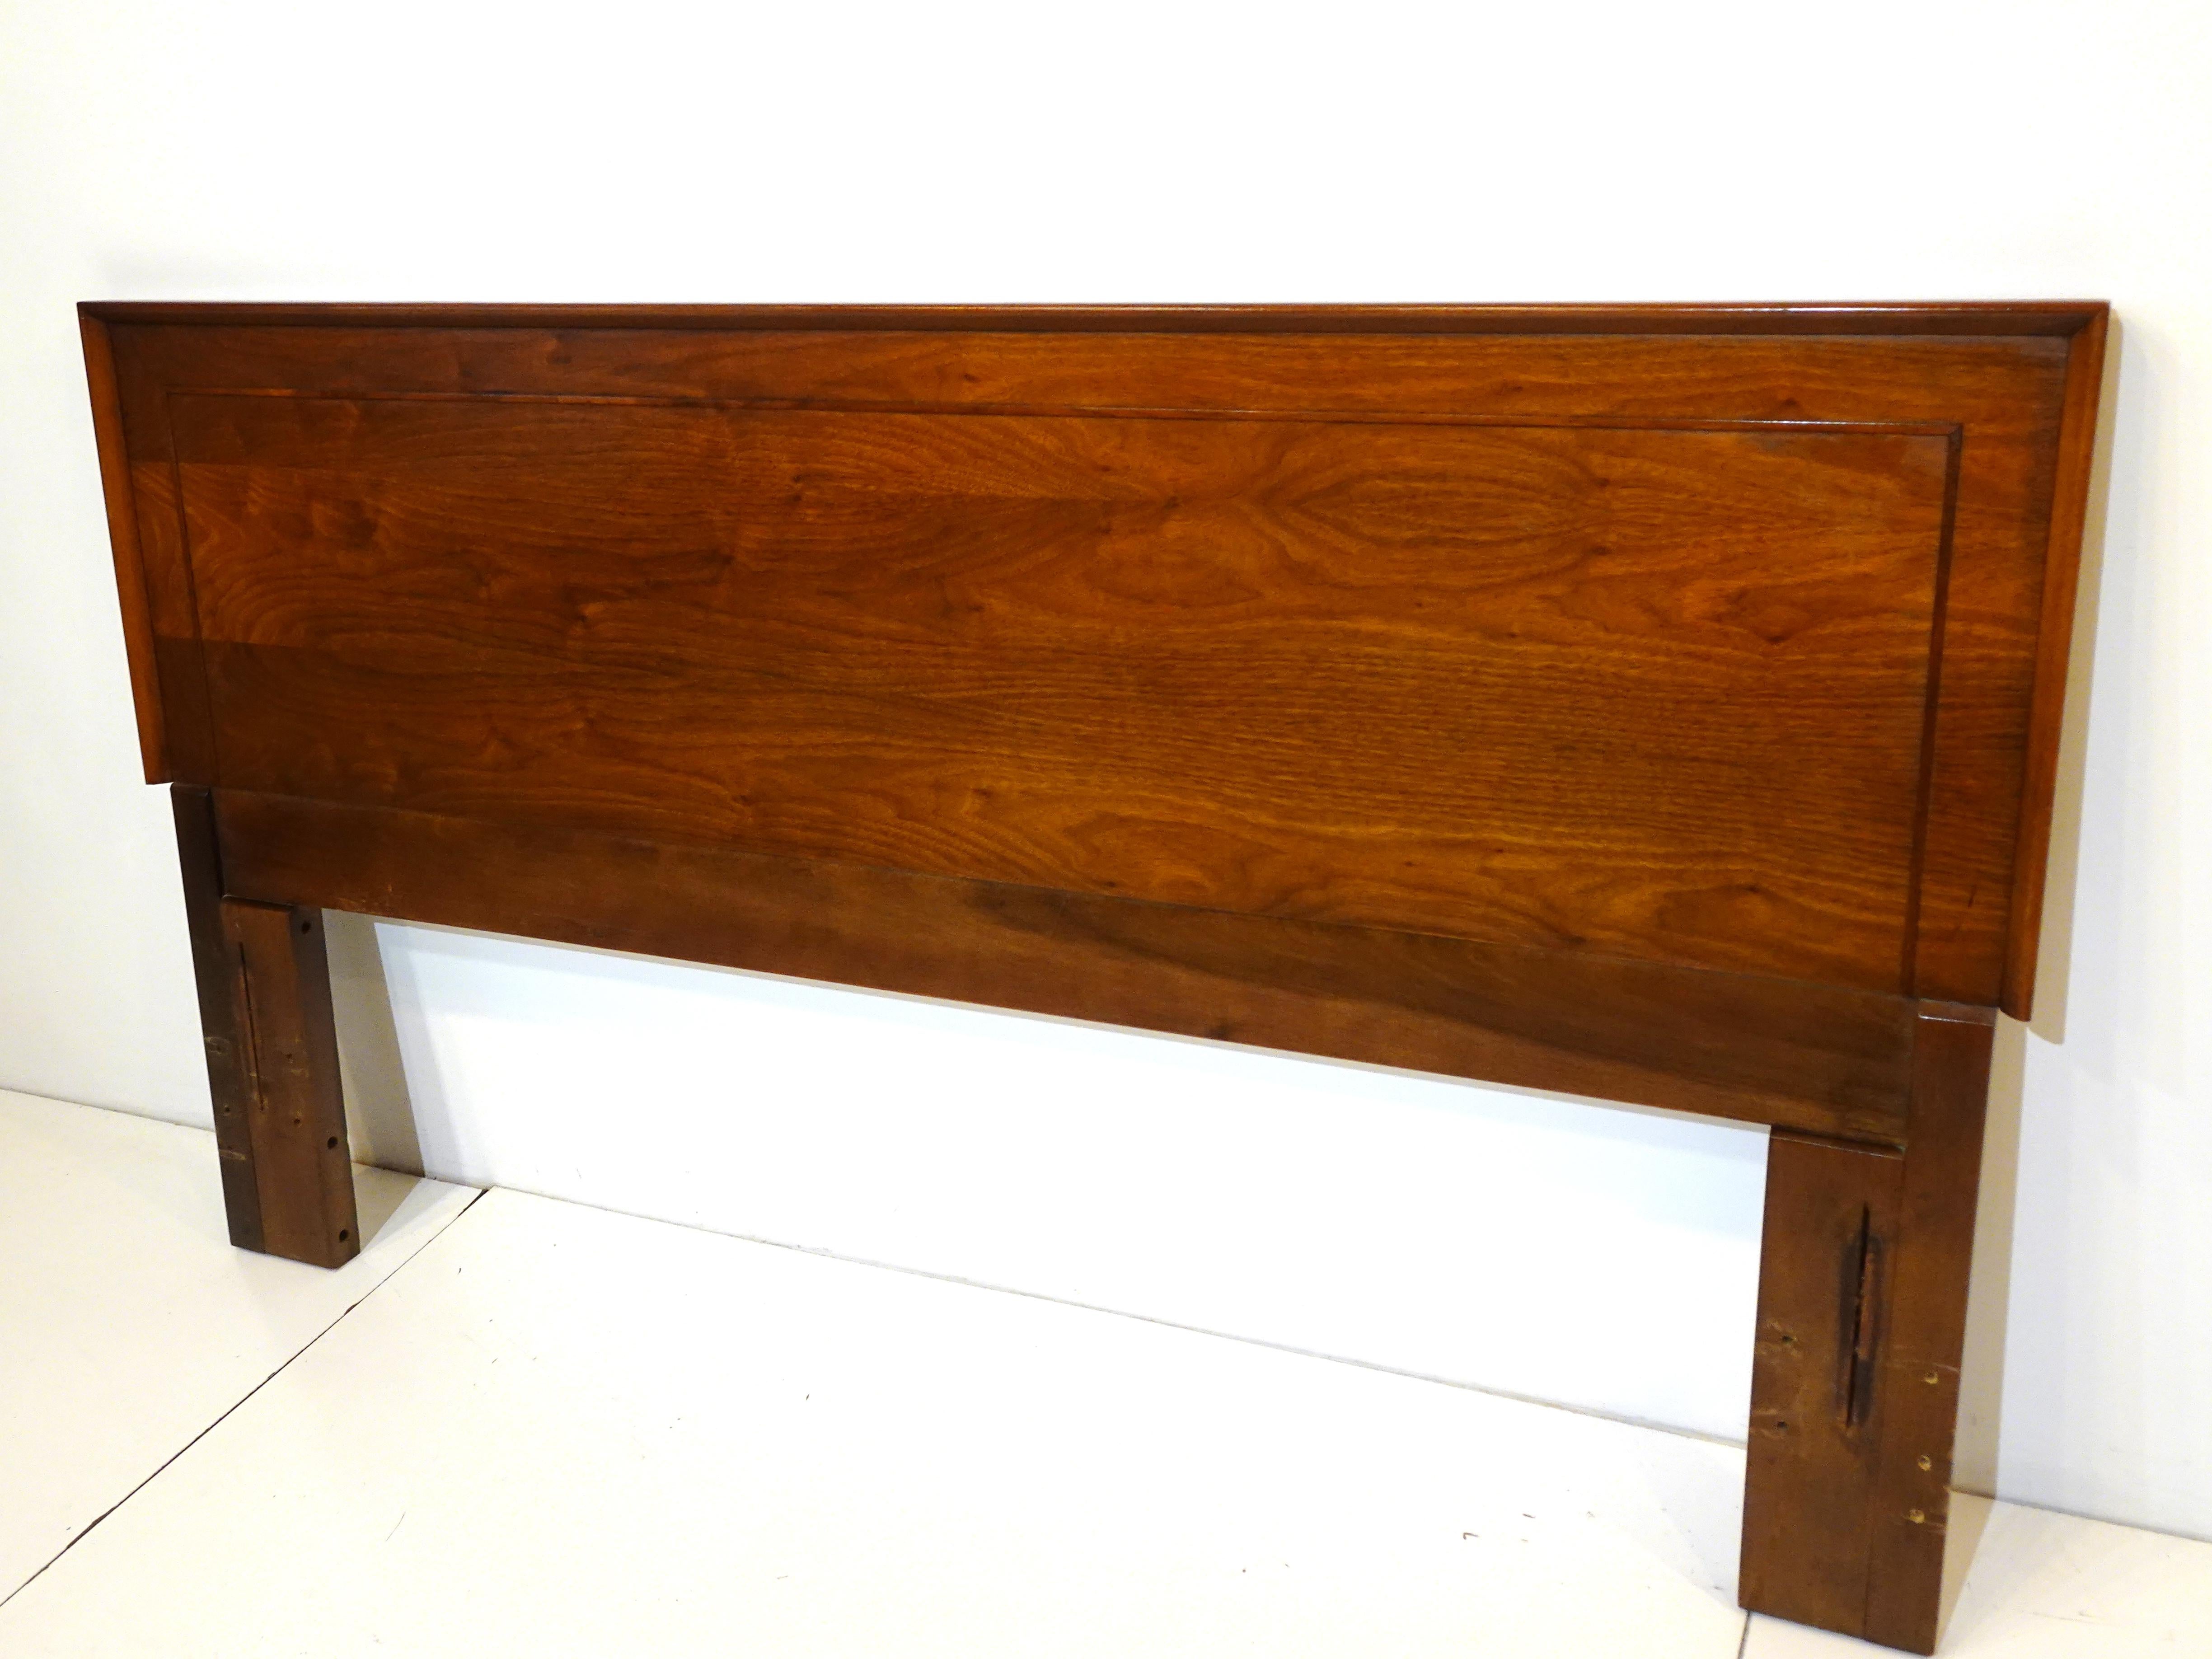 A beautifully grained walnut queen sized headboard with nice wood inter trim detail to the headboard , attaches to your excising mattress frame . Manufactured by the American of Martinsville Furniture company designed by Merton Gershun .